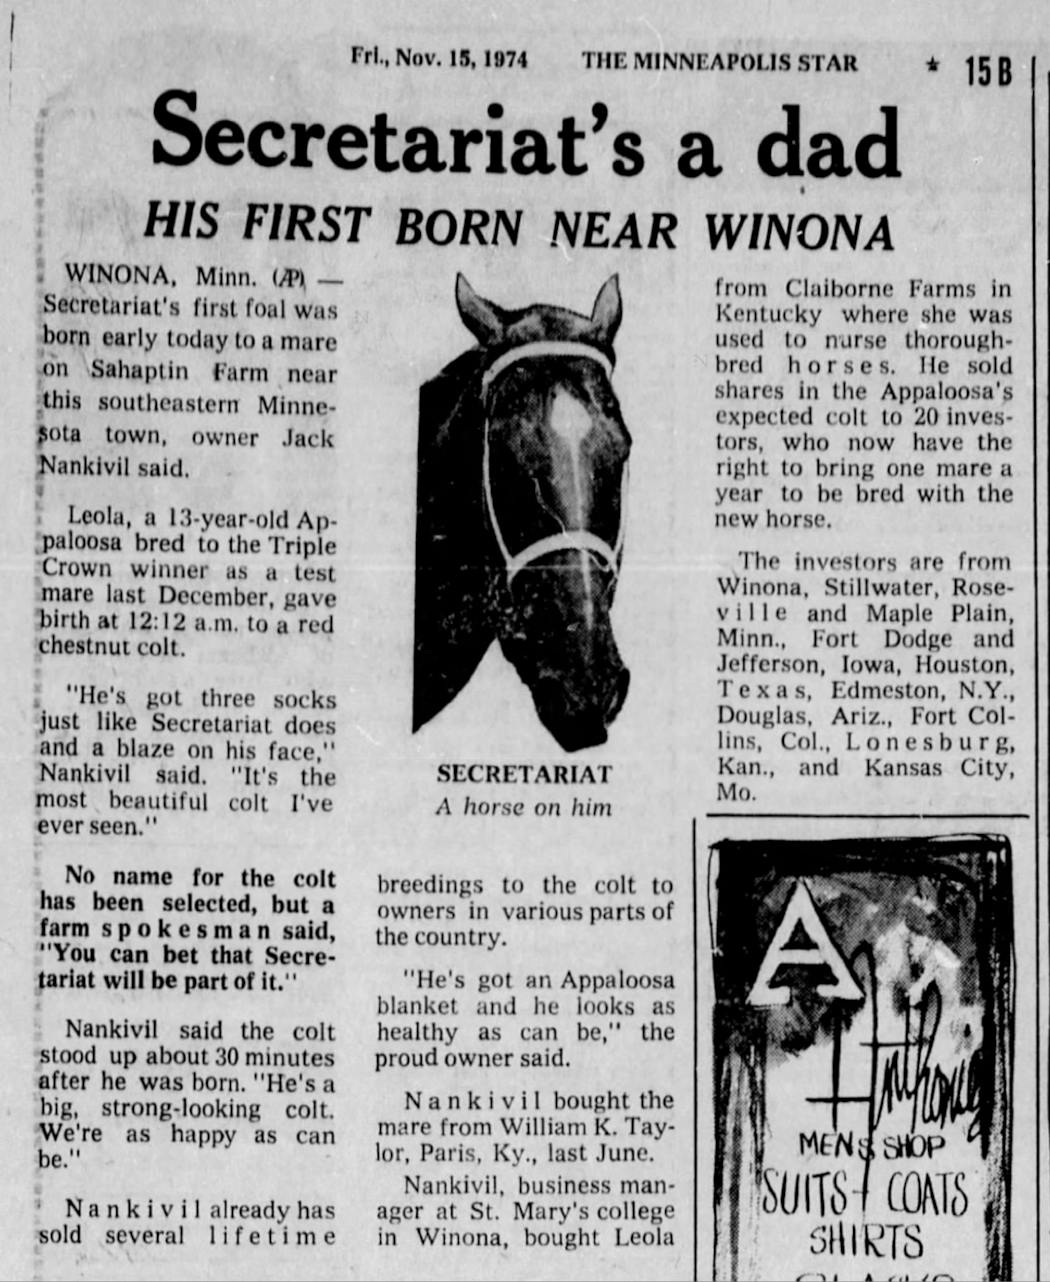 The birth of Secretariat’s first foal generated extensive news coverage.